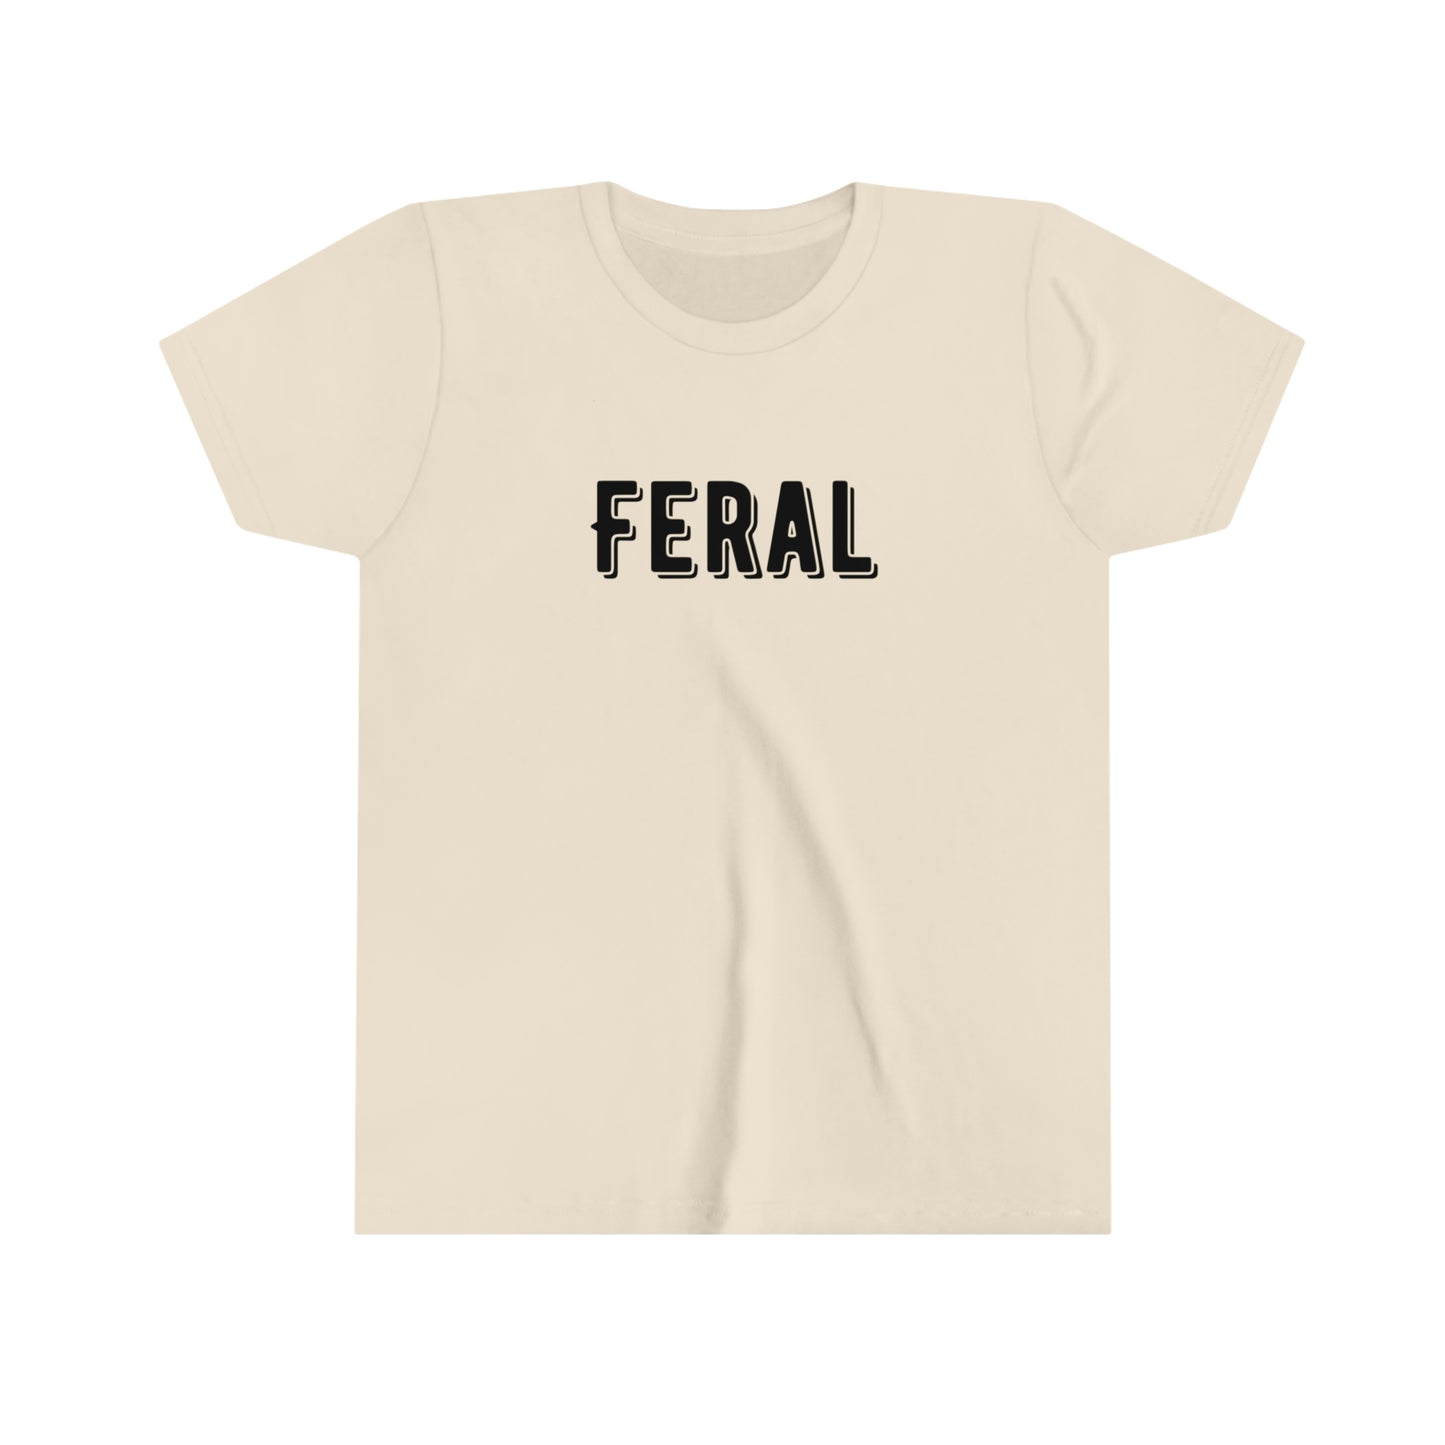 "Feral" Youth Short Sleeve Tee